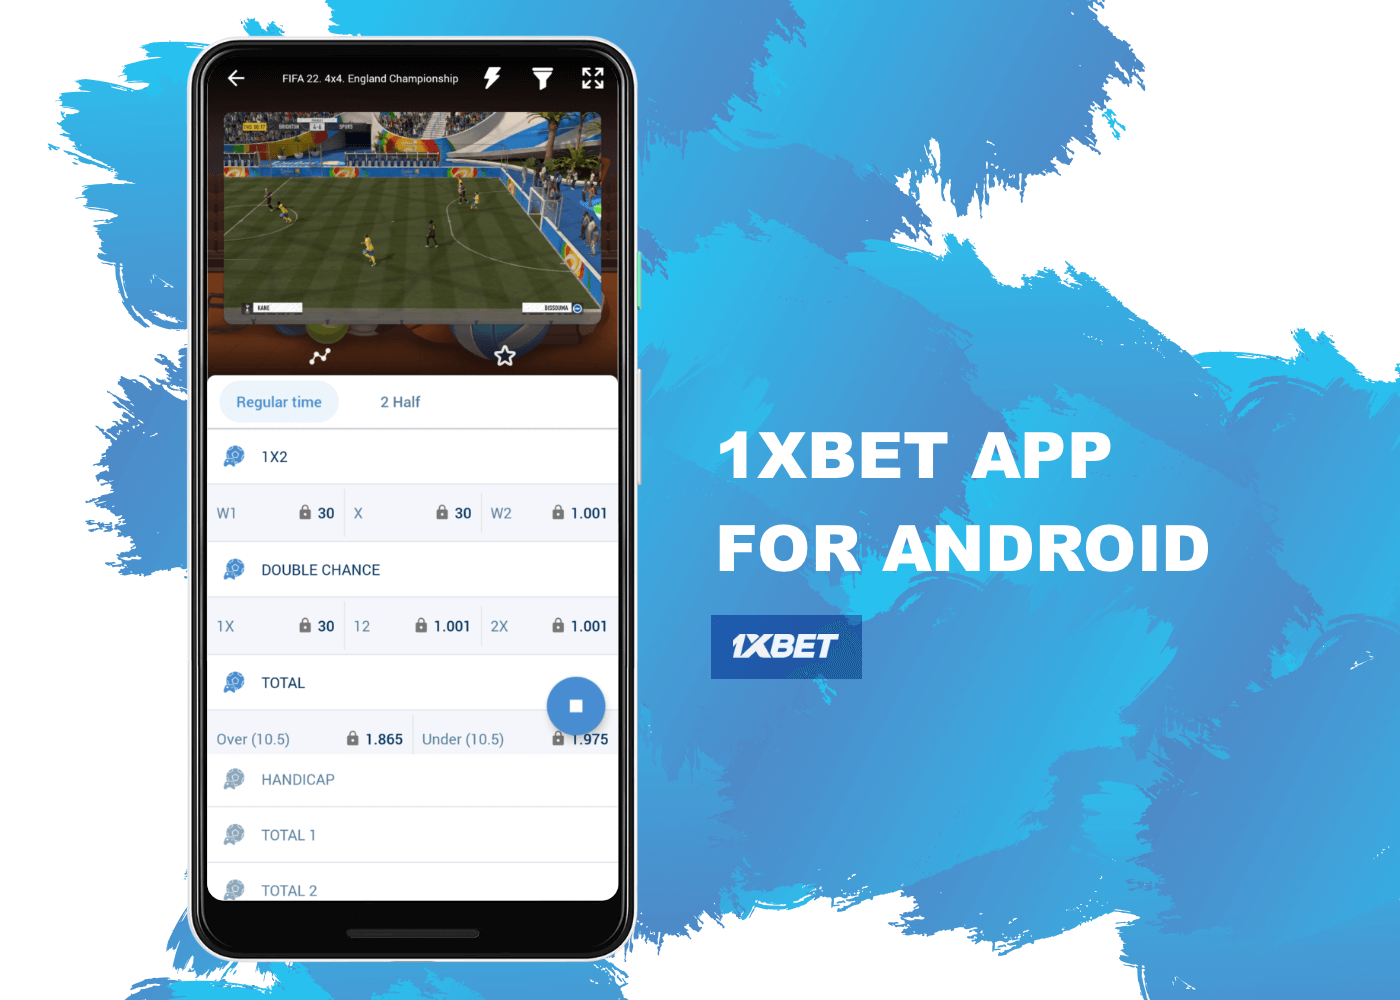 Detailed guide on how to download 1xbet app to your Android smartphone or tablet